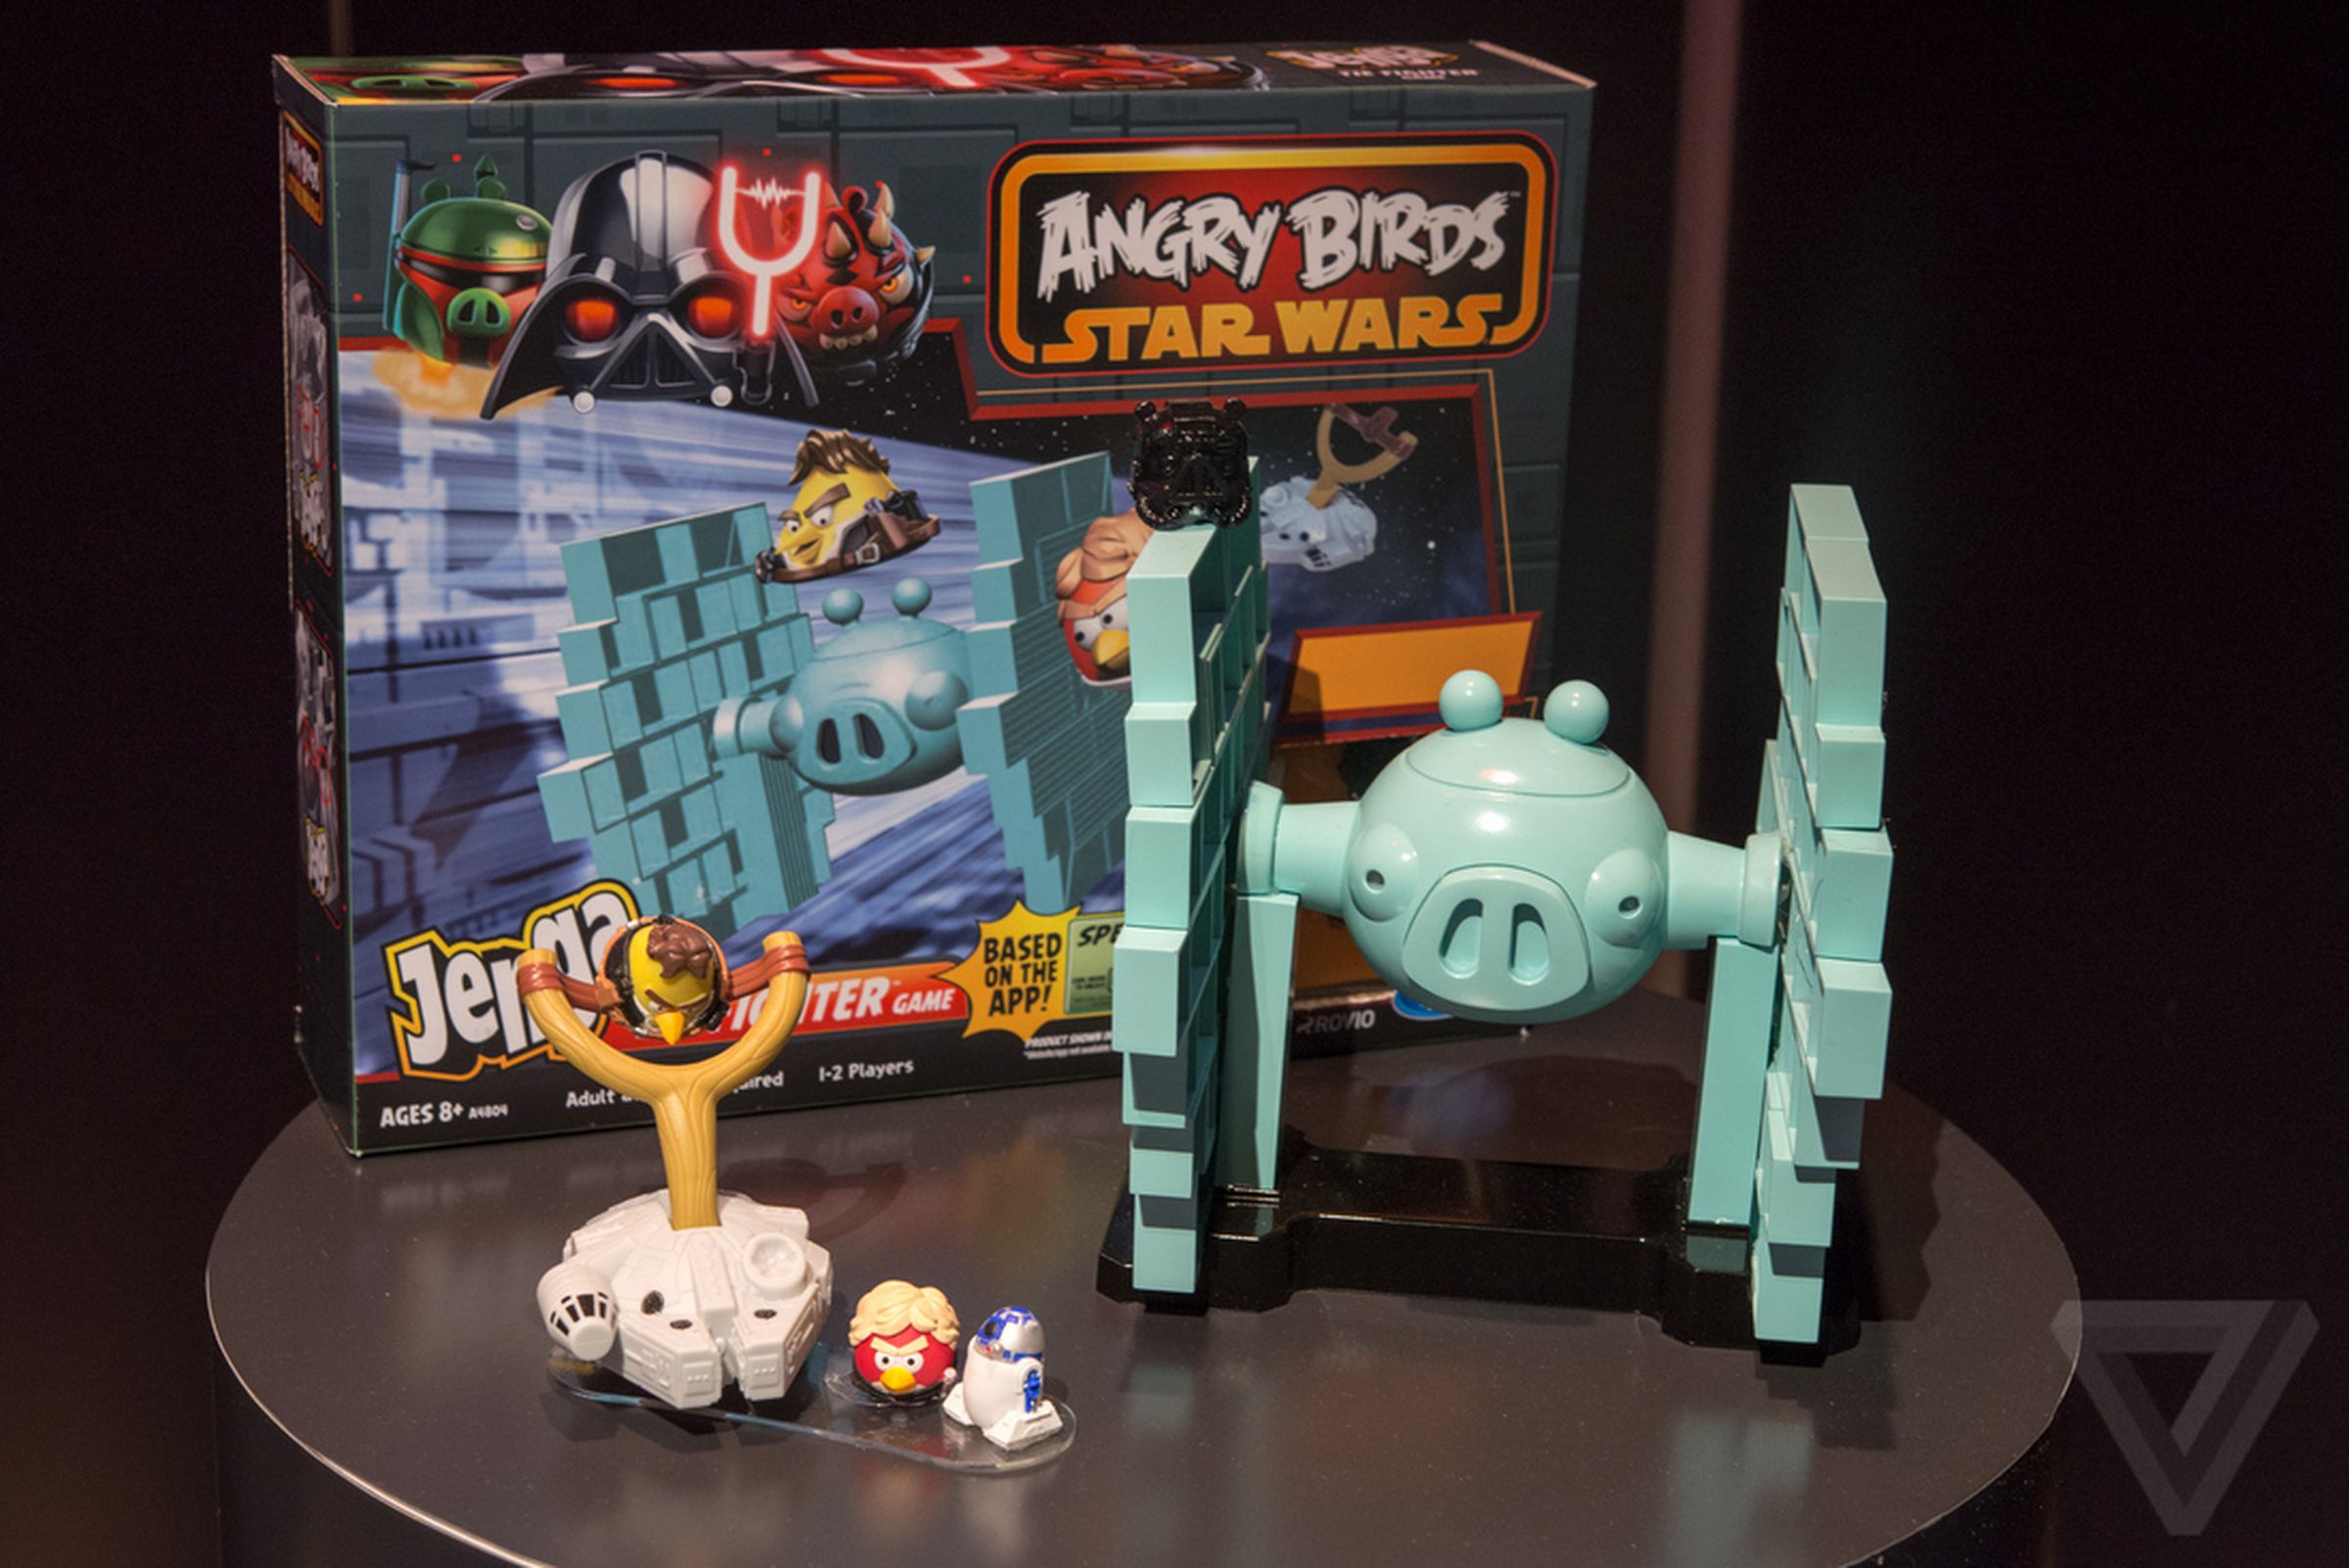 Toy Fair 2013 in pictures